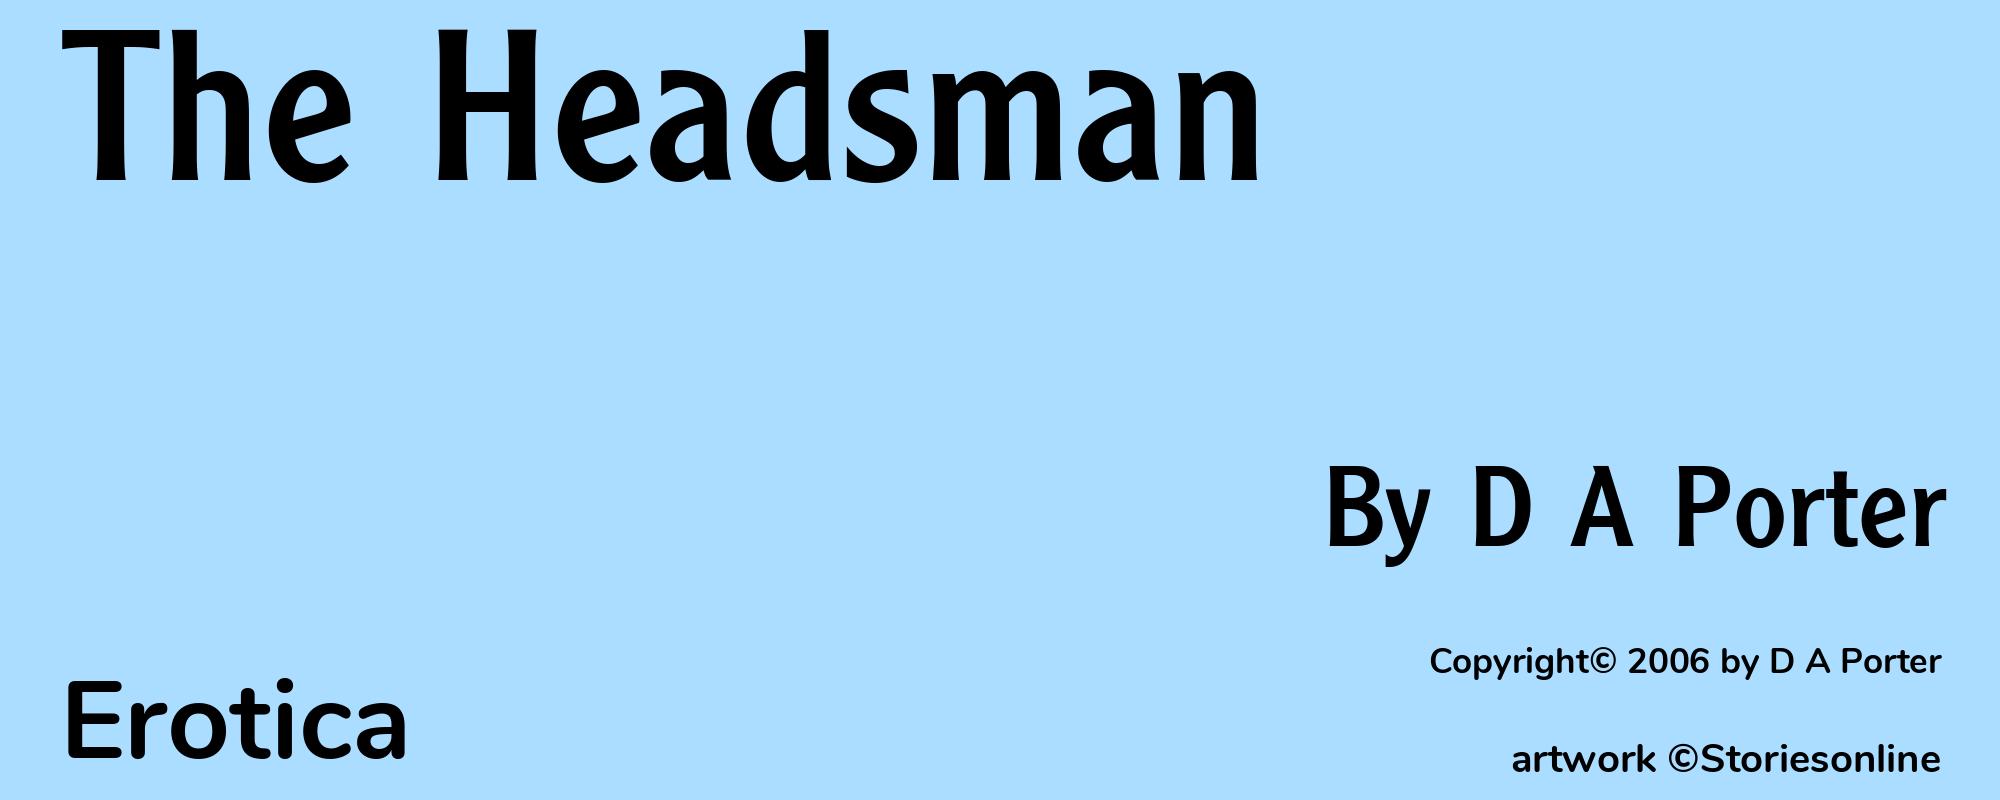 The Headsman - Cover